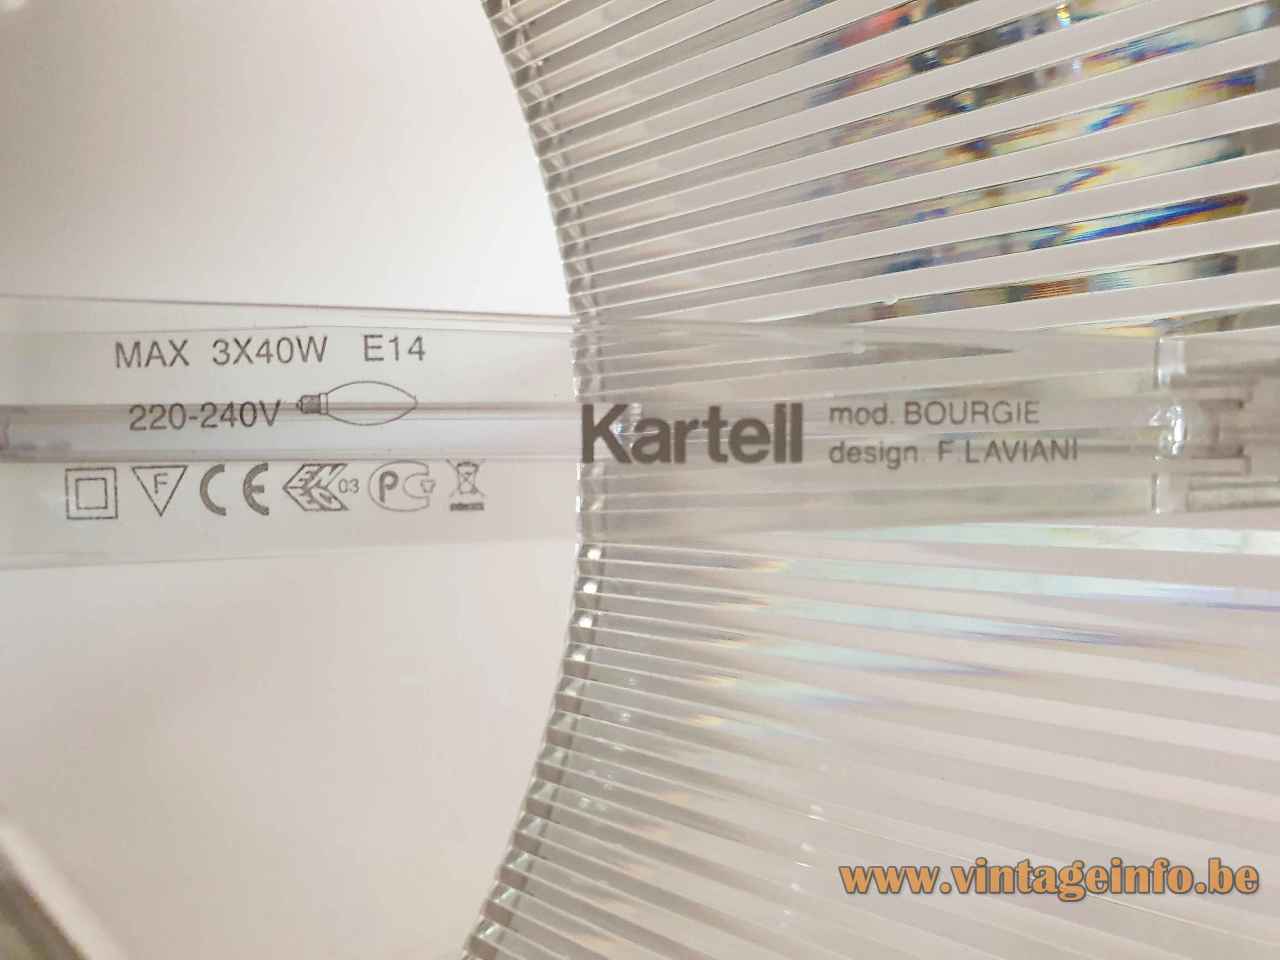 Kartell Bourgie table lamp clear plastic lampshade label & logo 3 x 40 watt E14 sockets Italy 2000s